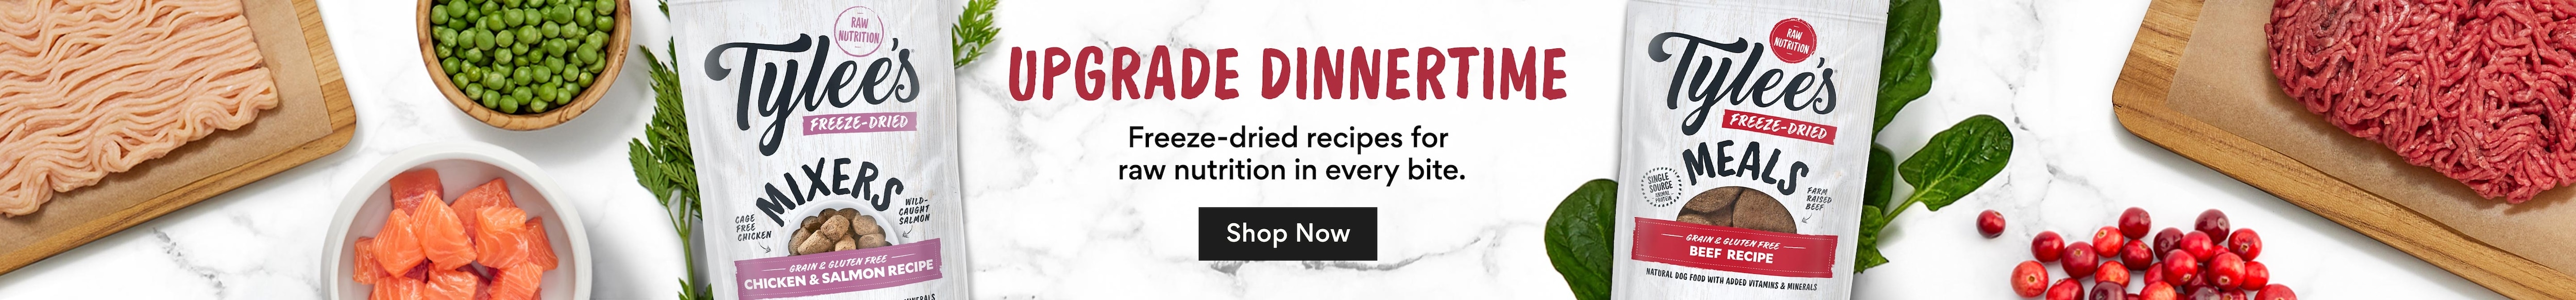 Upgrade Dinnertime. Freeze-dried recipes for raw nutrition in every bite.